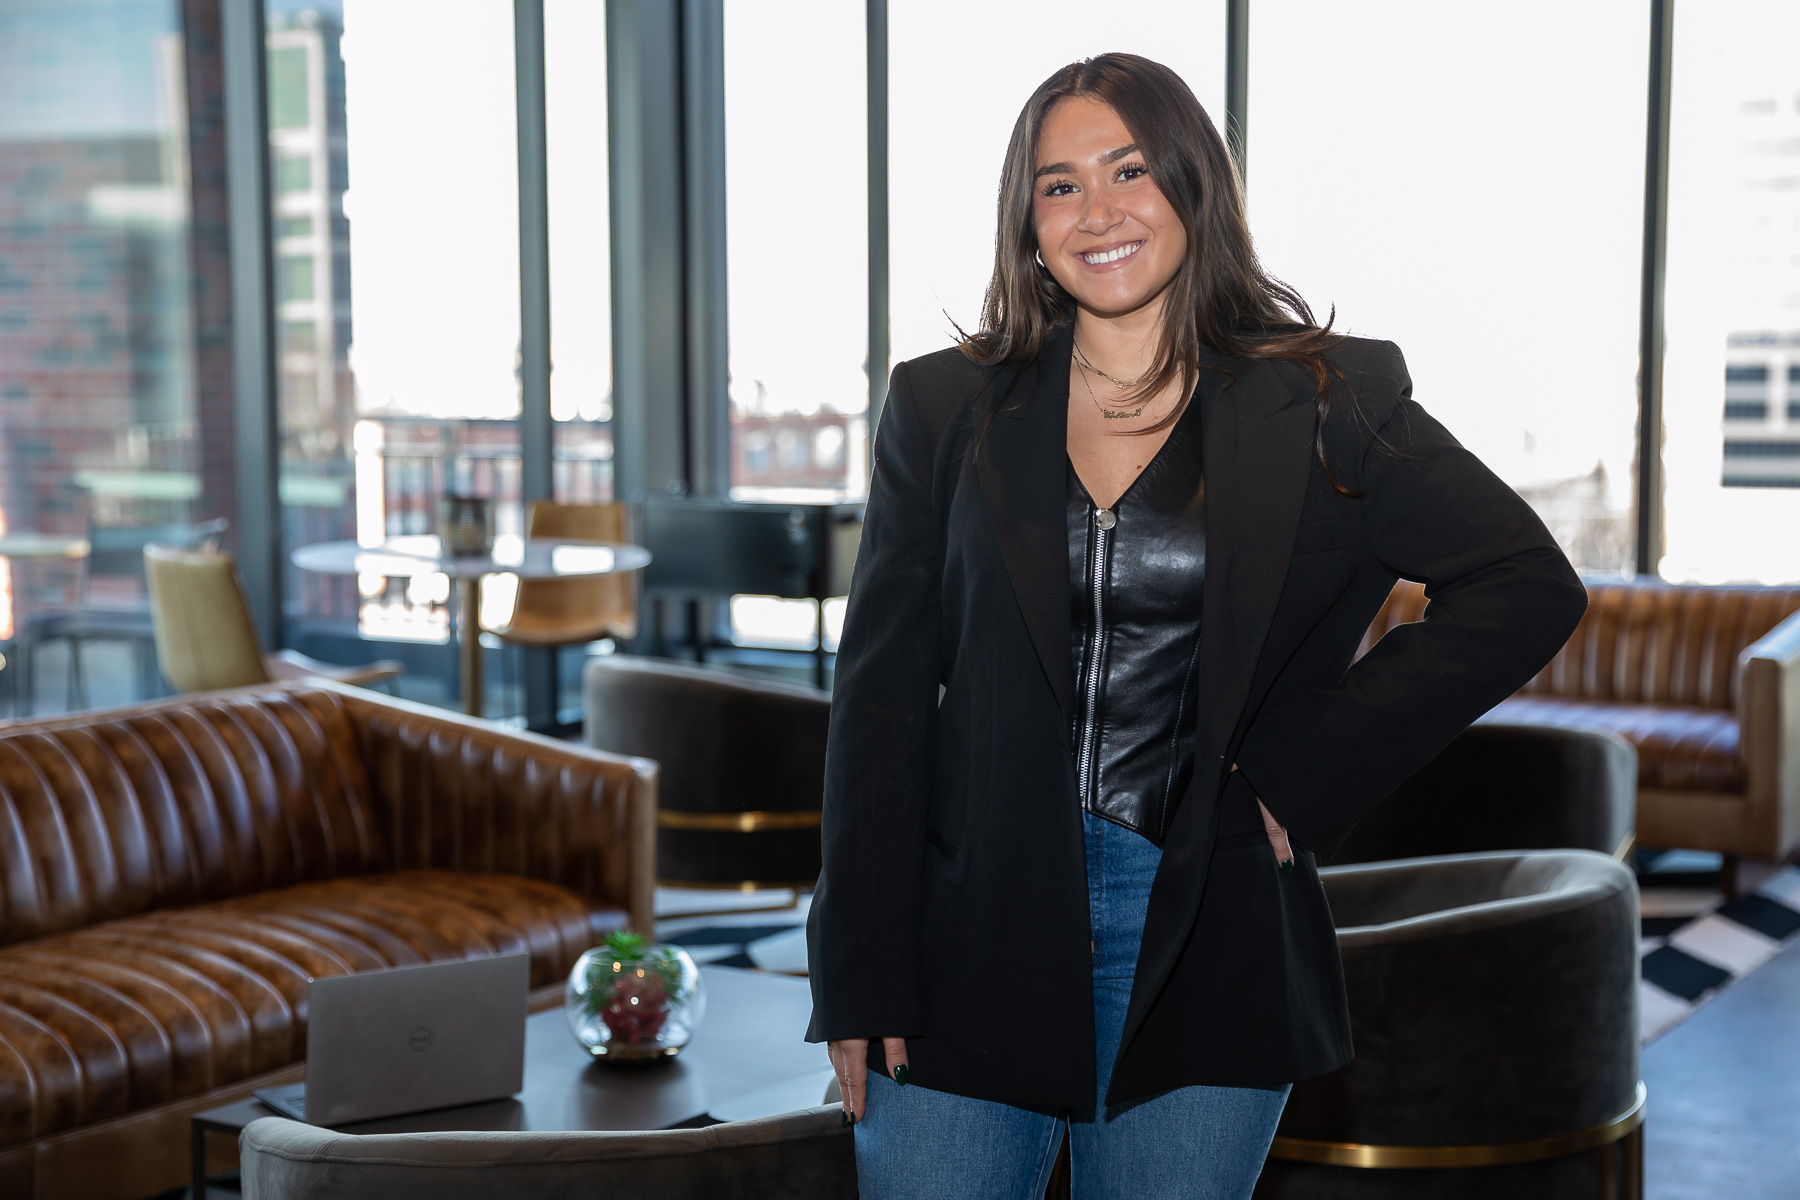 Celine Soto, manager of Client Services at rEvolution Integrated Sports Marketing Agency, spoke with the class and is also an alumna who participated in this class while at DePaul.